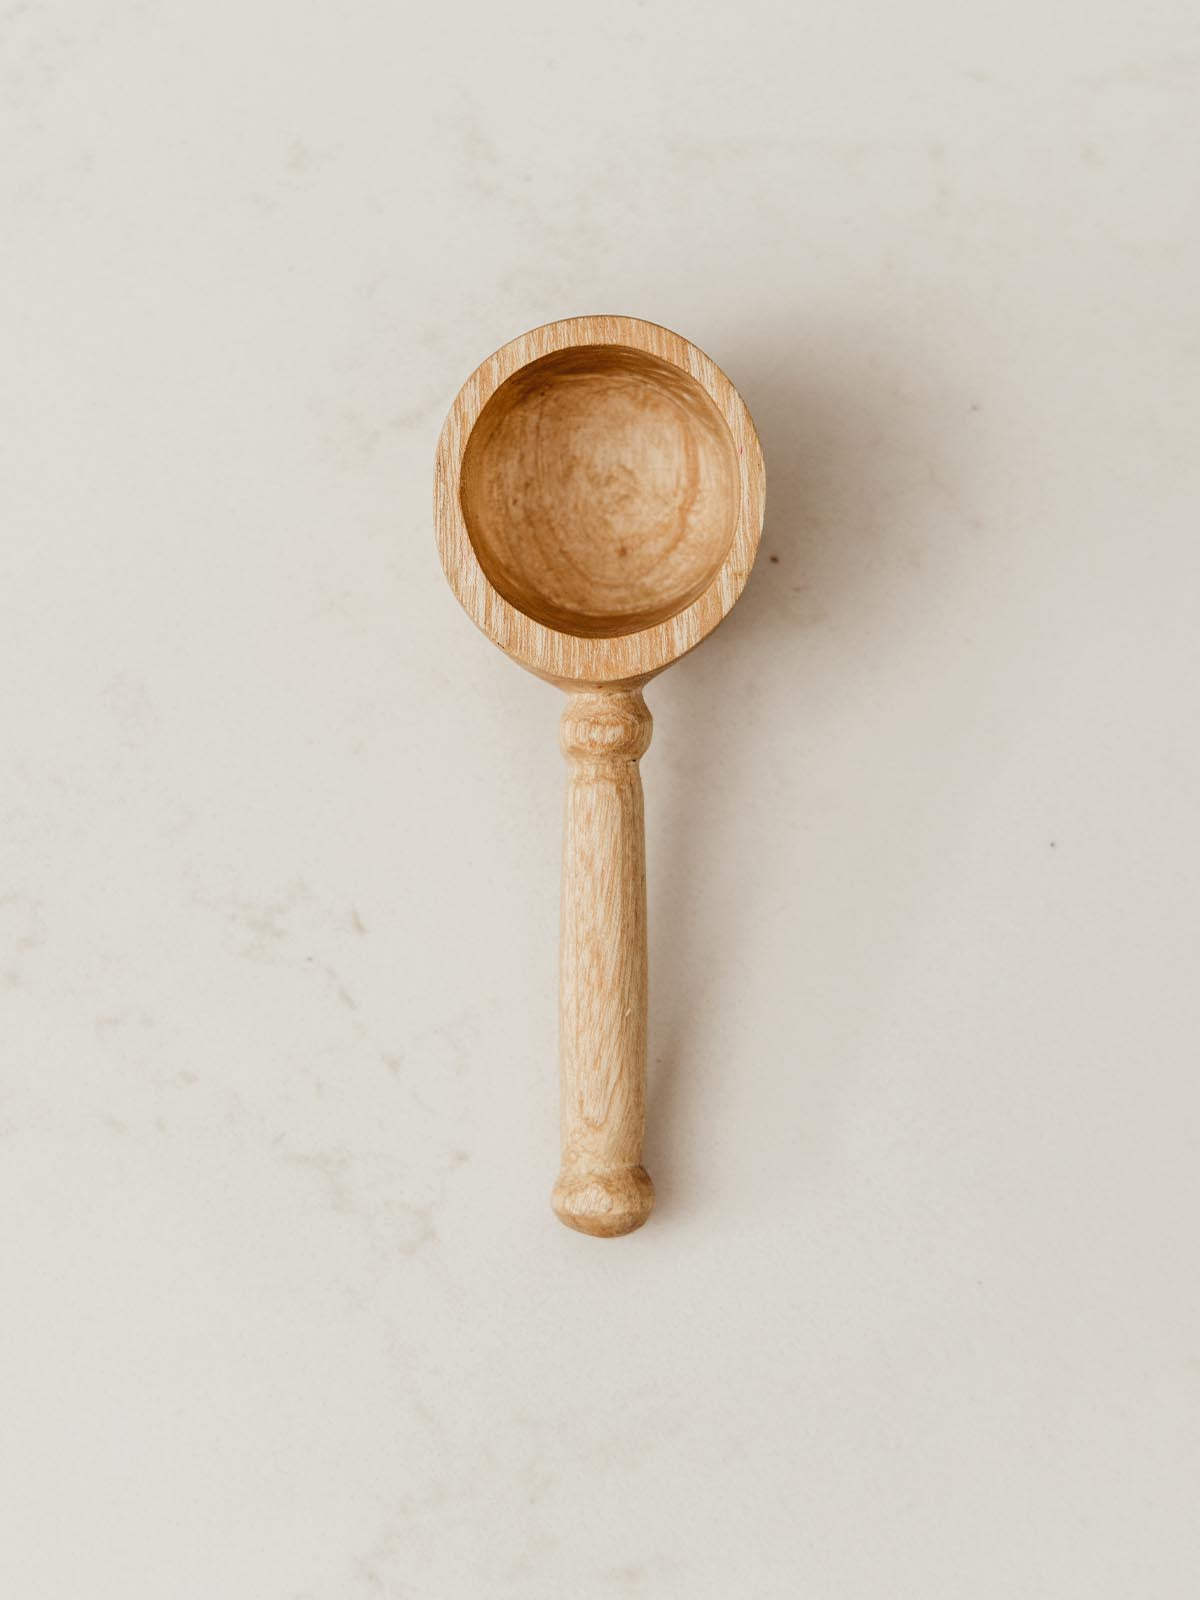 Coffee Scoop on white counter with slight detail seen on handle.